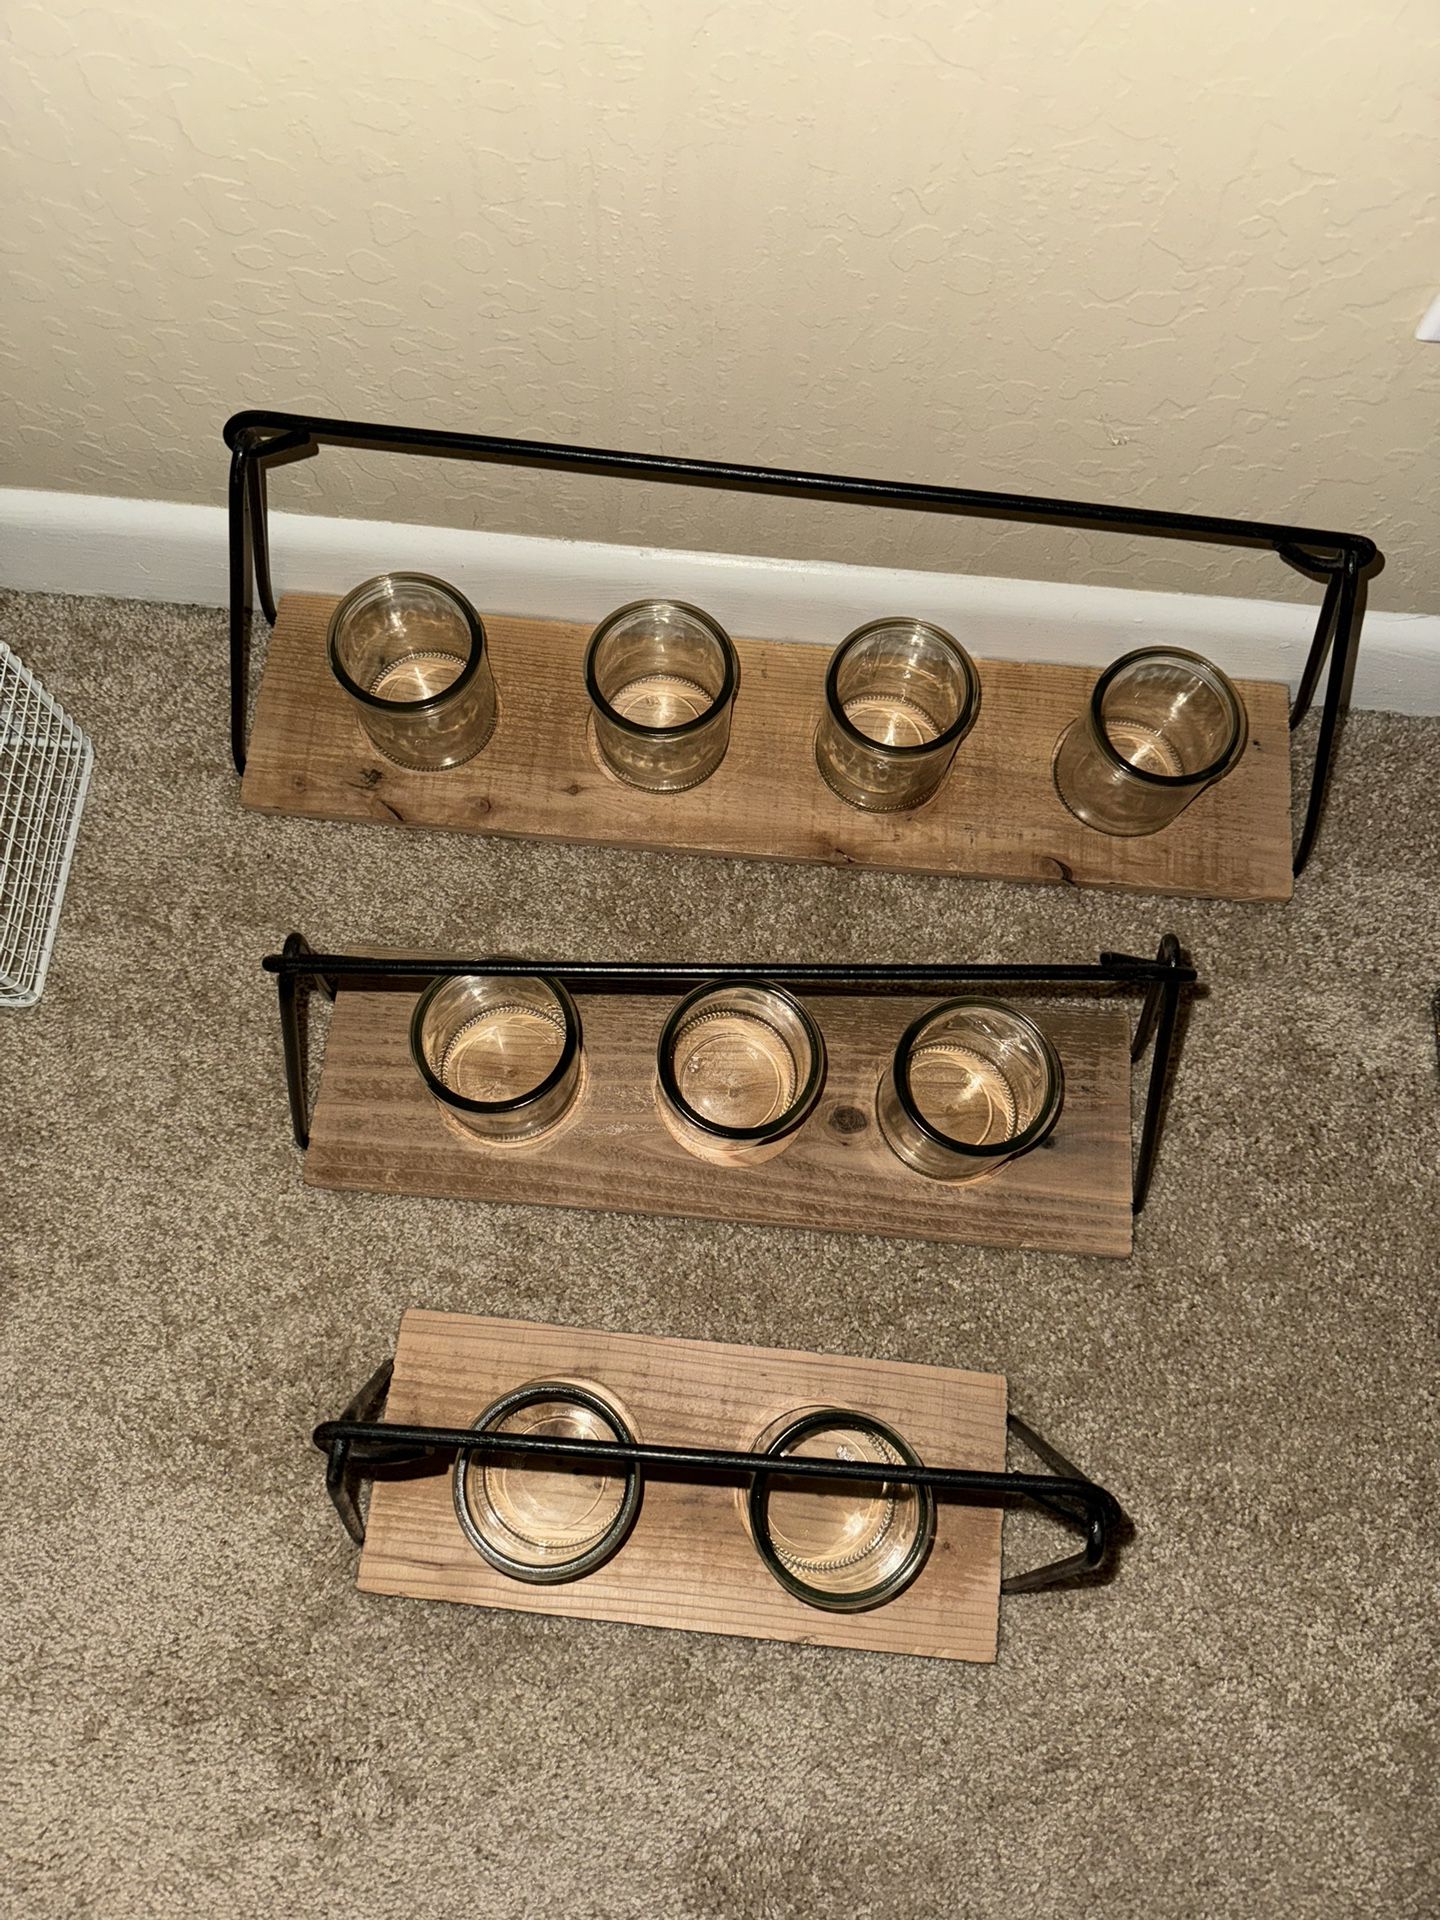 Brand New Wood W Glass Candle Holders Or Planters From decor Steals 